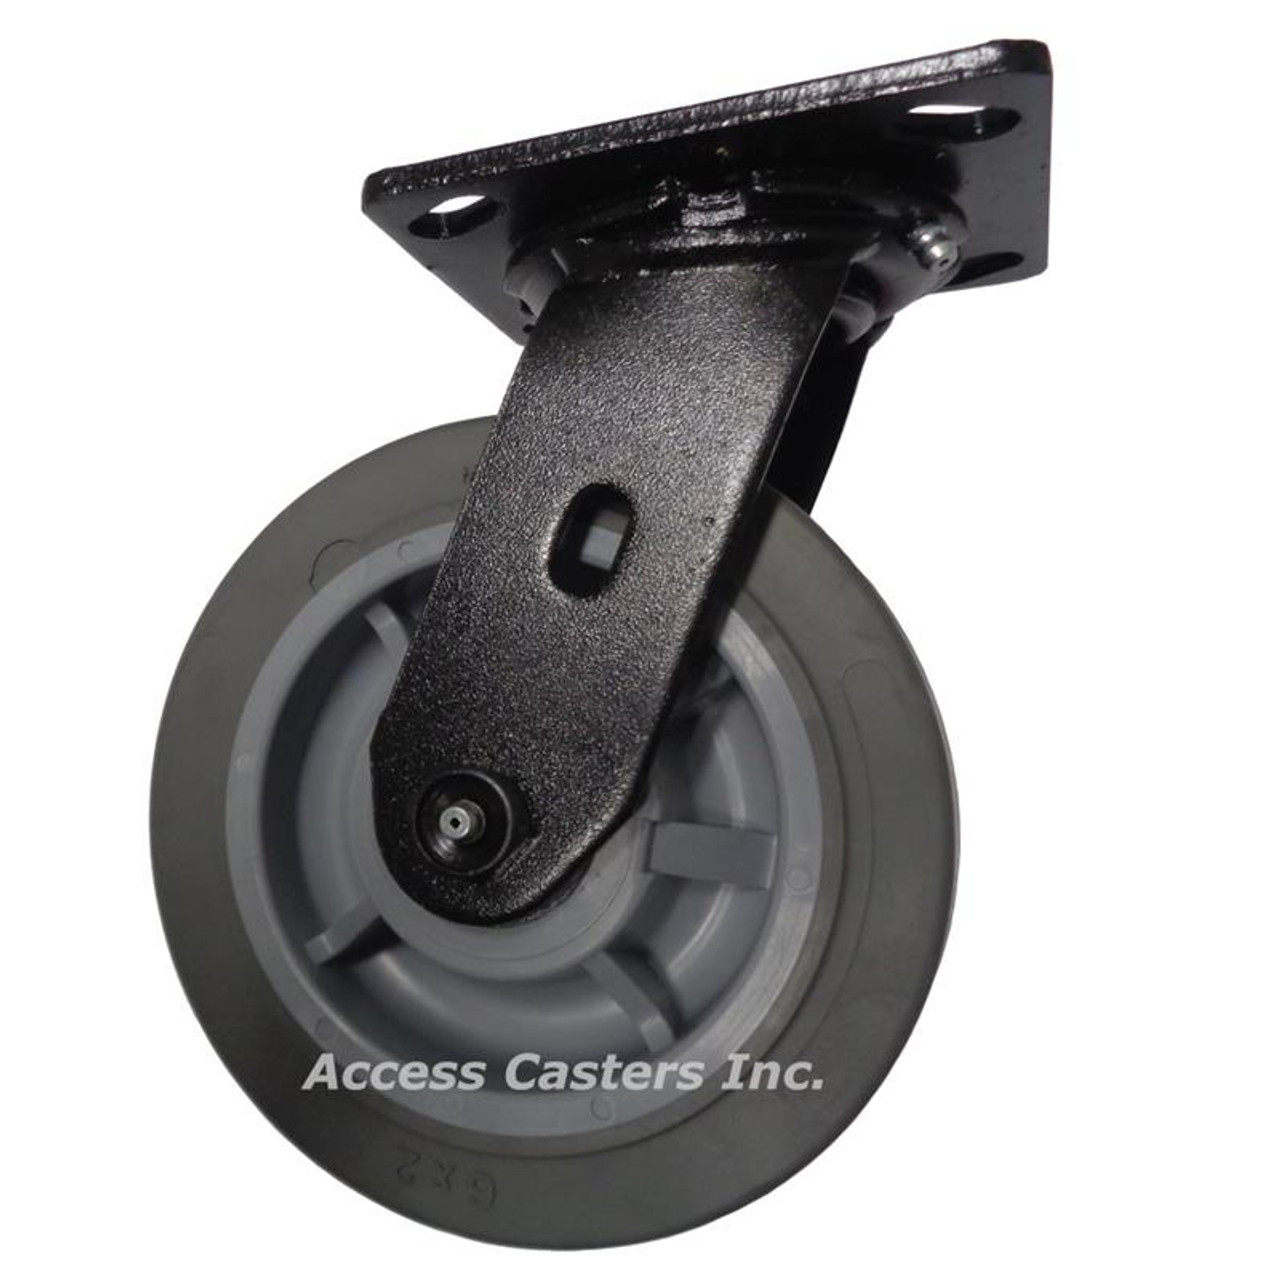 Black finish swivel caster with gray TPR wheel